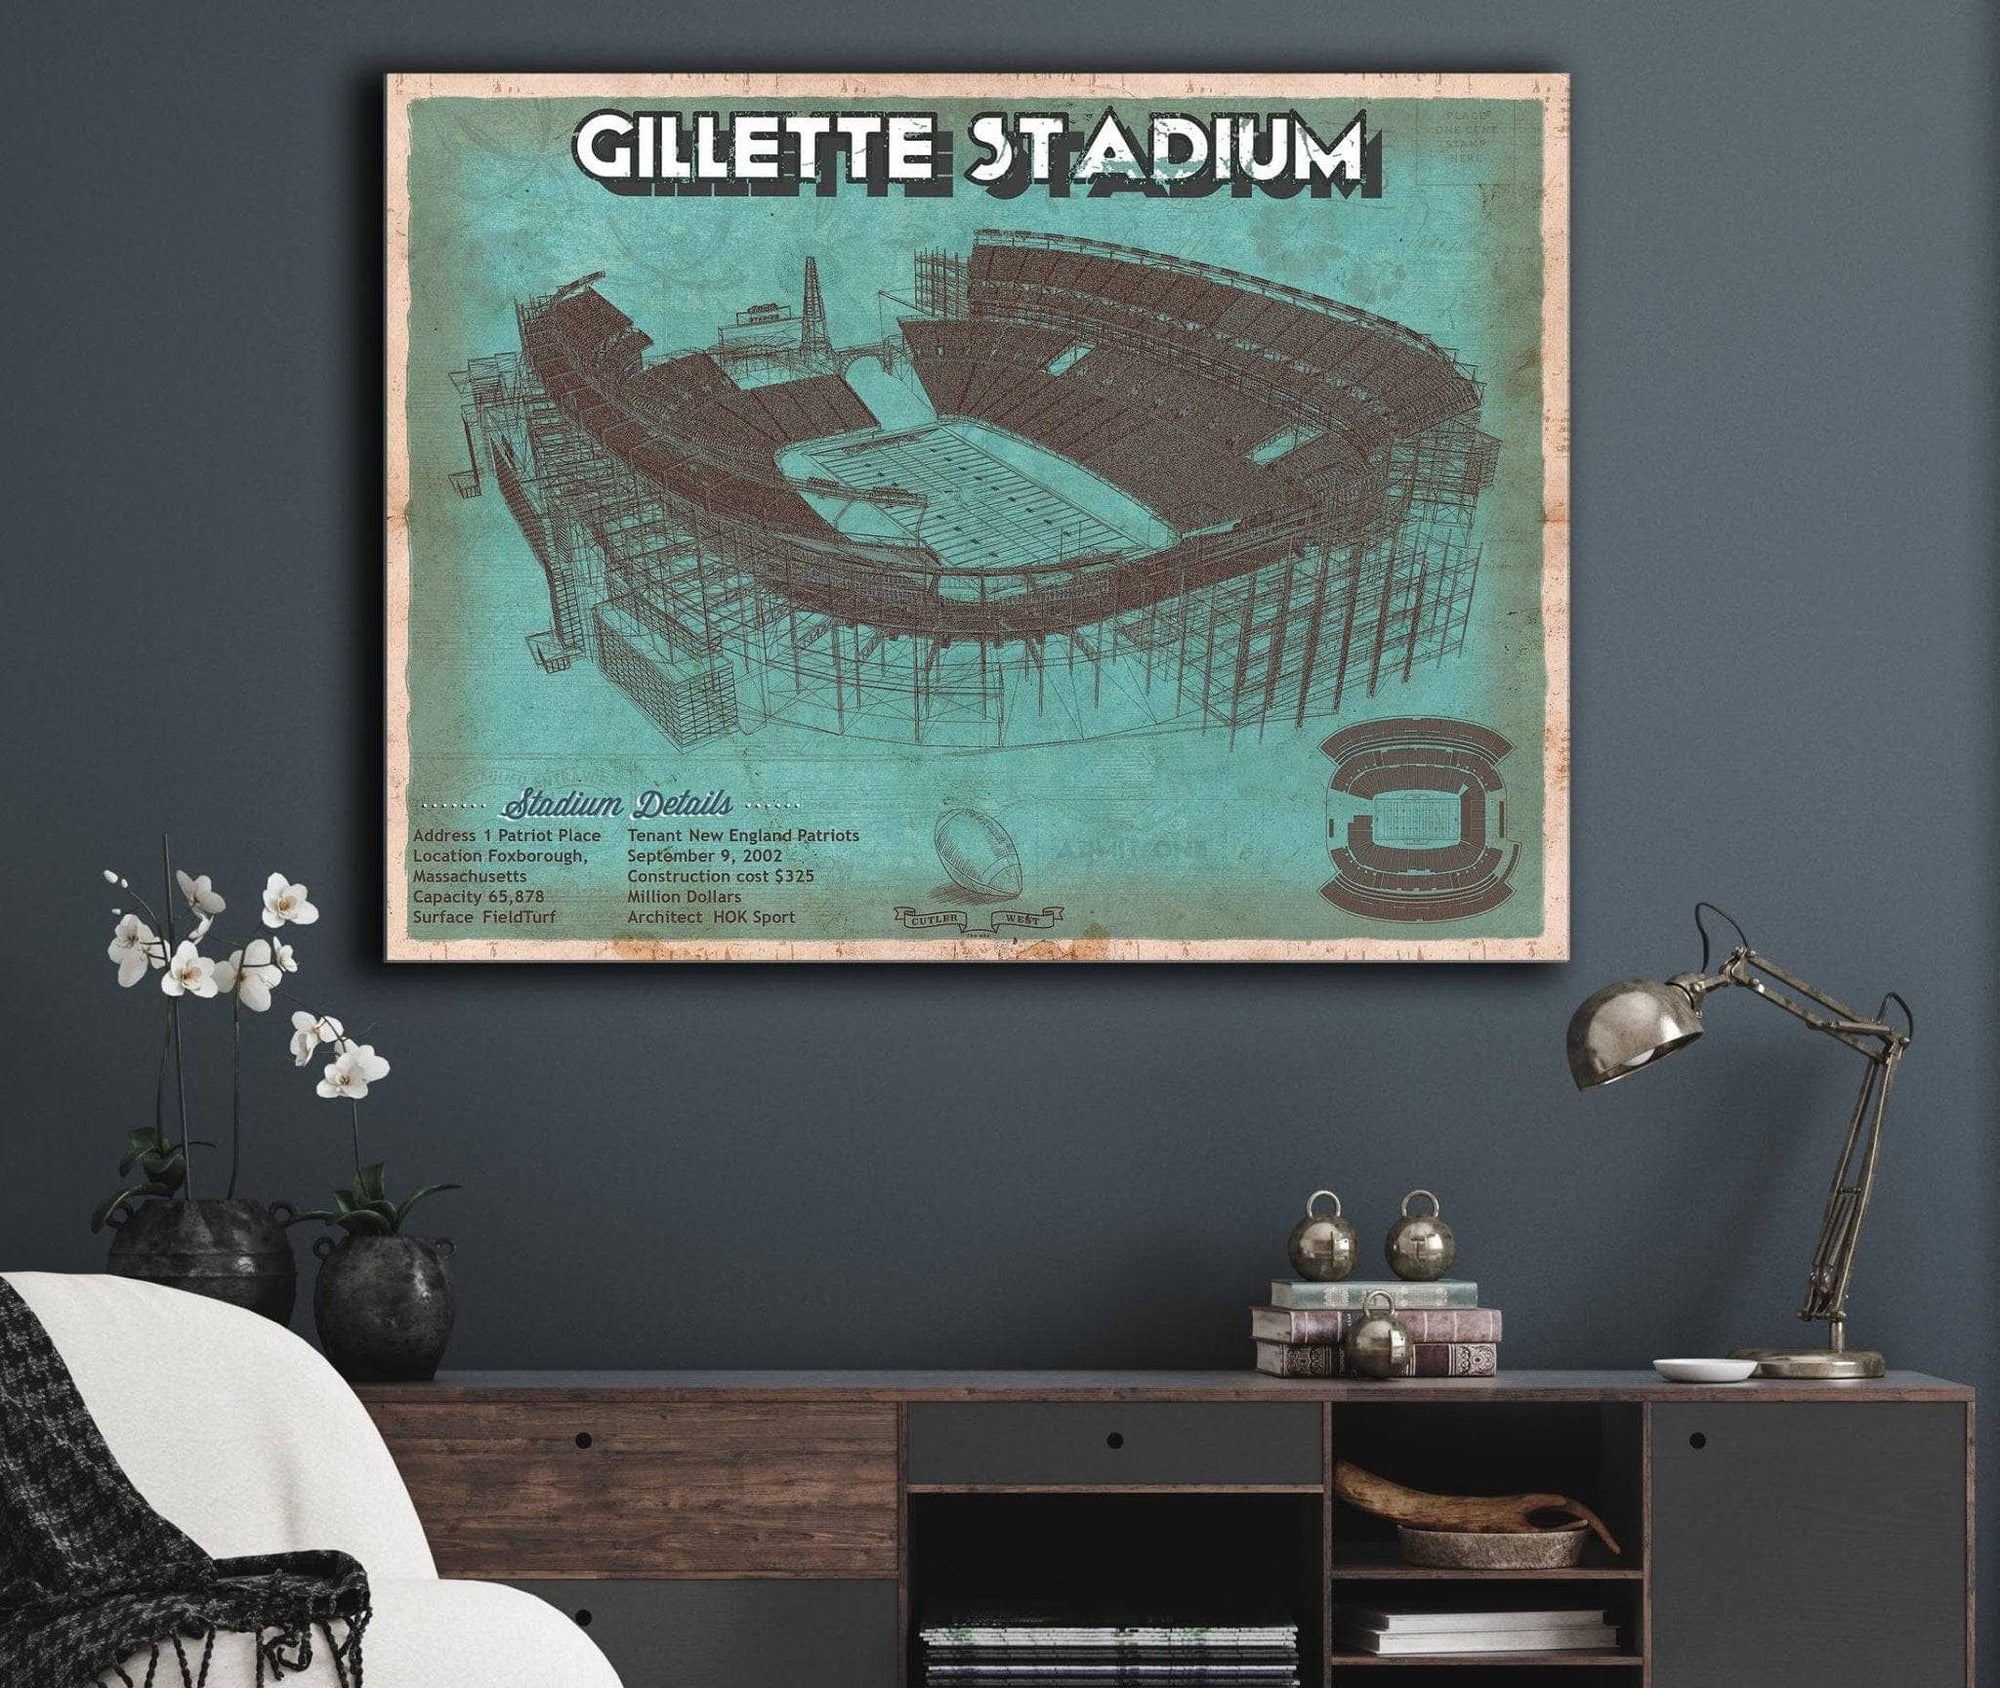 Cutler West Pro Football Collection New England Patriots Gillette Stadium Seating Chart - Vintage Football Team Color Print